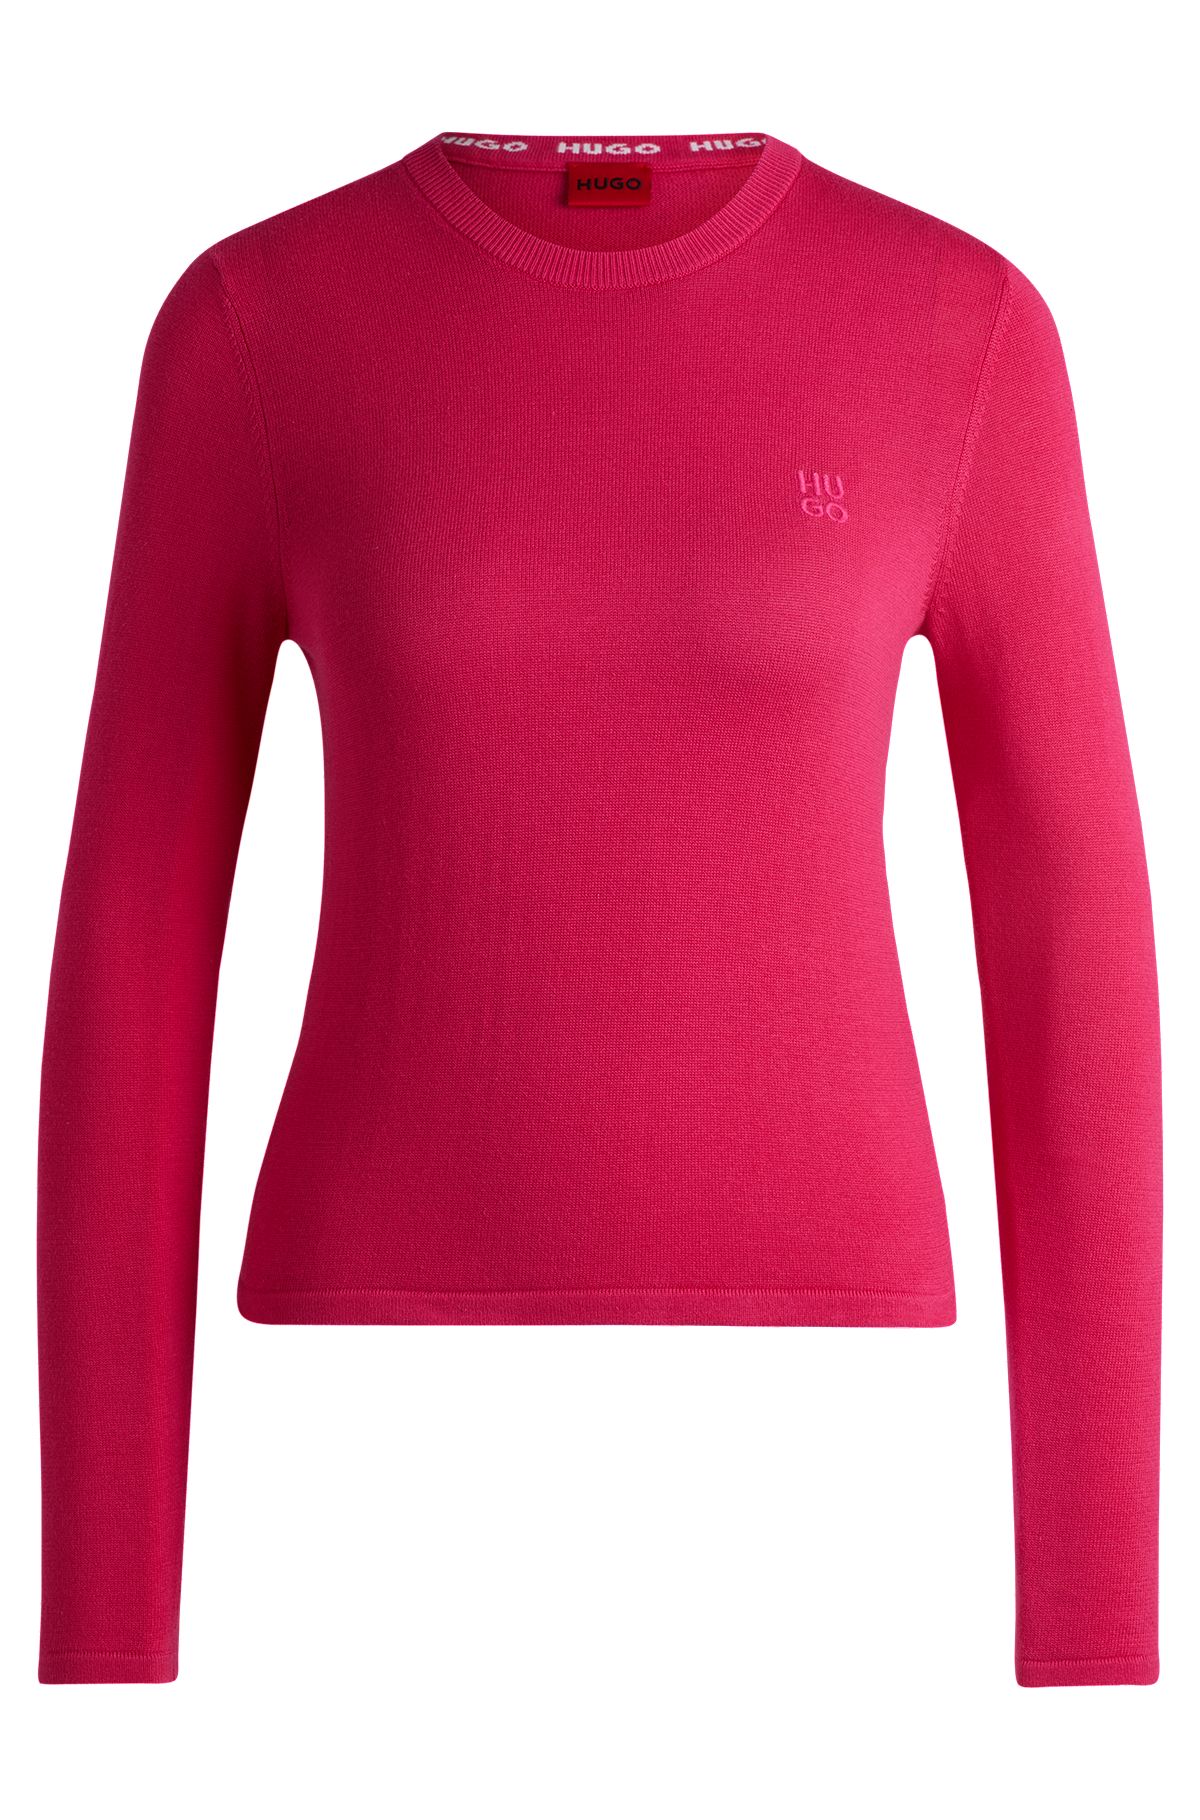 Knitted-cotton sweater with stacked-logo embroidery, Pink